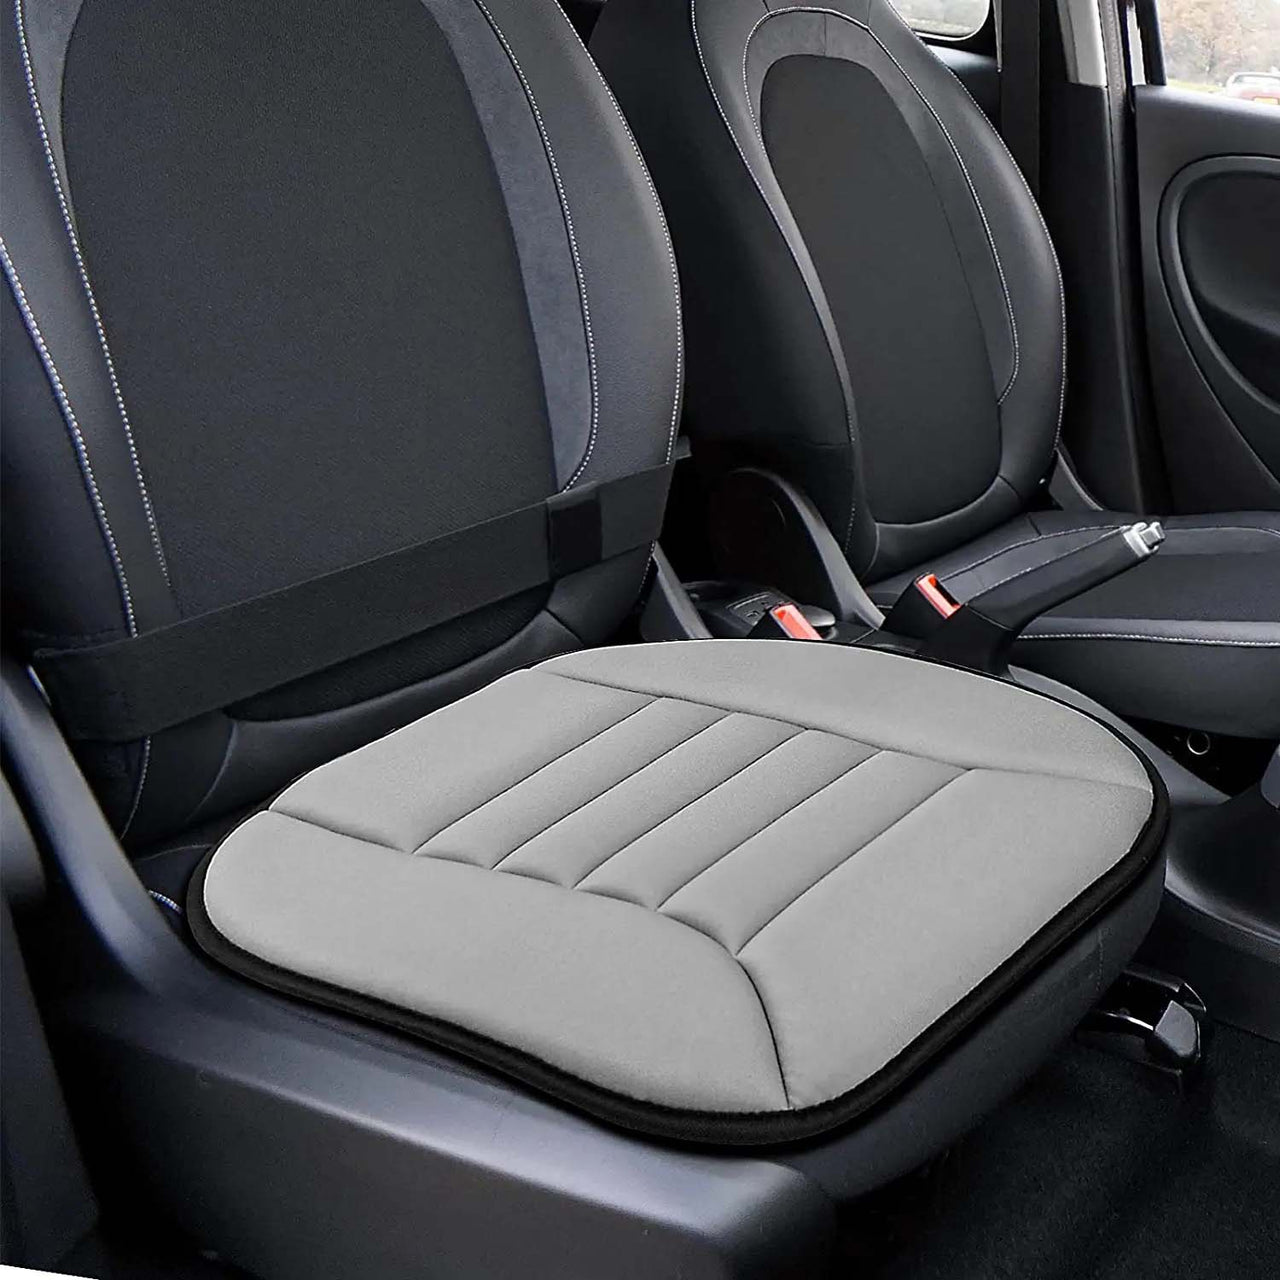 Car Seat Cushion with 1.2inch Comfort Memory Foam, Custom Fit For Your Cars, Seat Cushion for Car and Office Chair JG19989